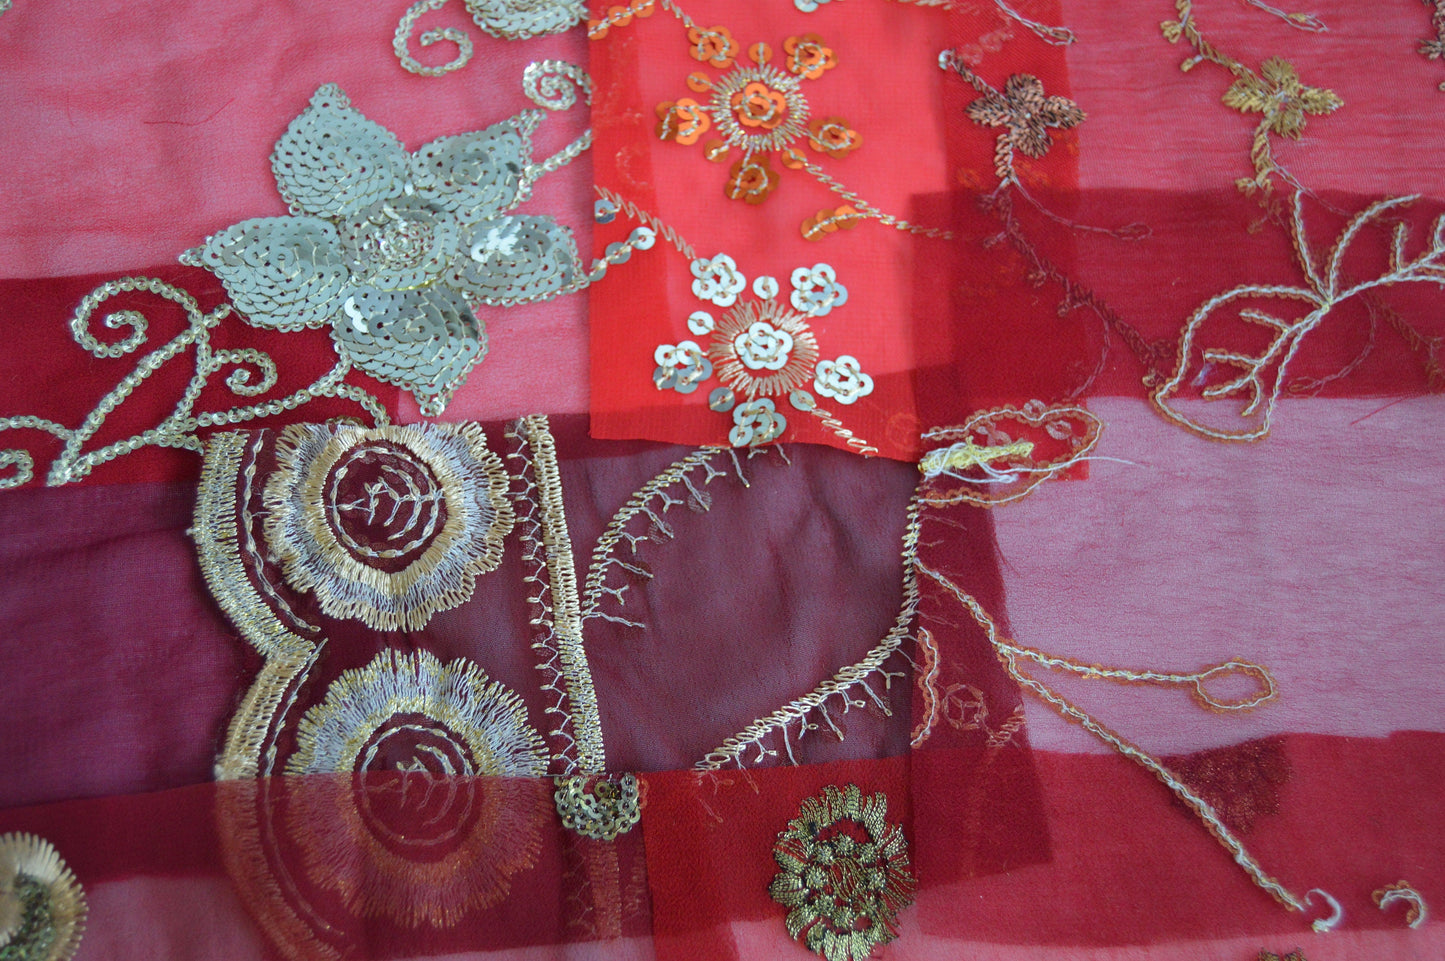 Red Assorted Embellished Sari Fabric Remnants Scraps - 10 Pieces